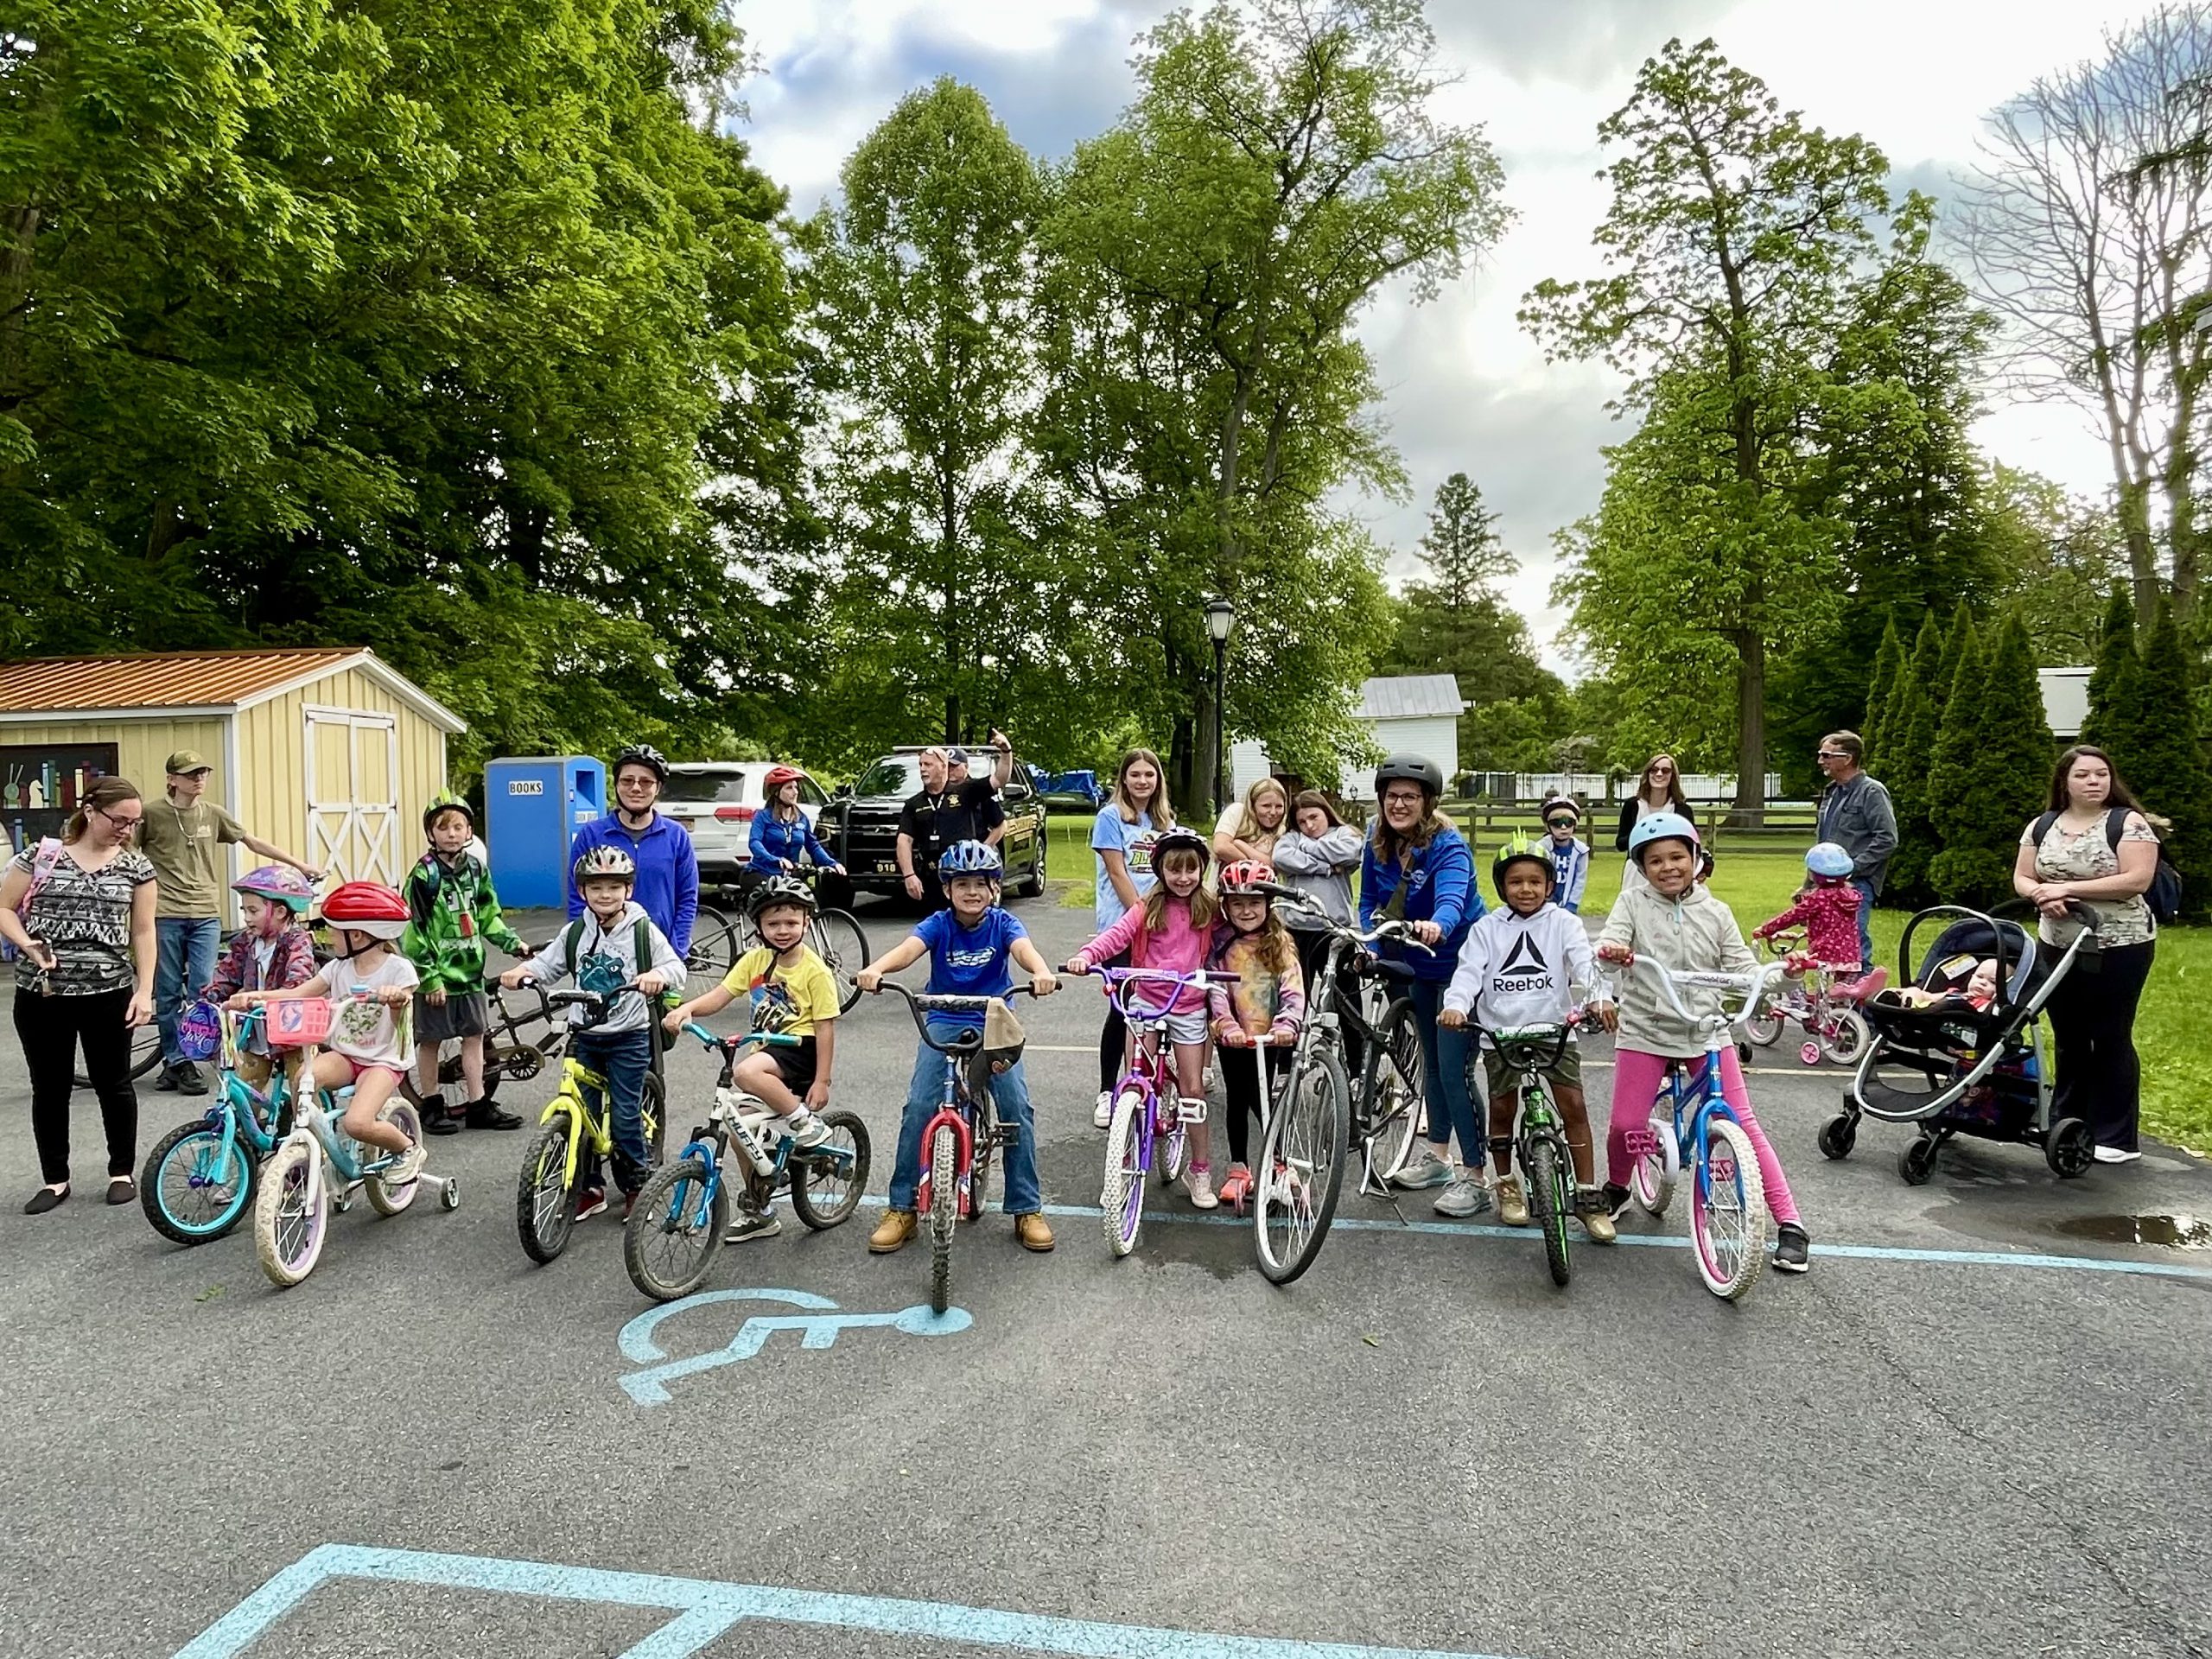 Our Bike/Walk to School event last week was a great success as we had many staff, students and family members help celebrate active lifestyles! Many thanks to our EPTSO who helped sponsor the event!